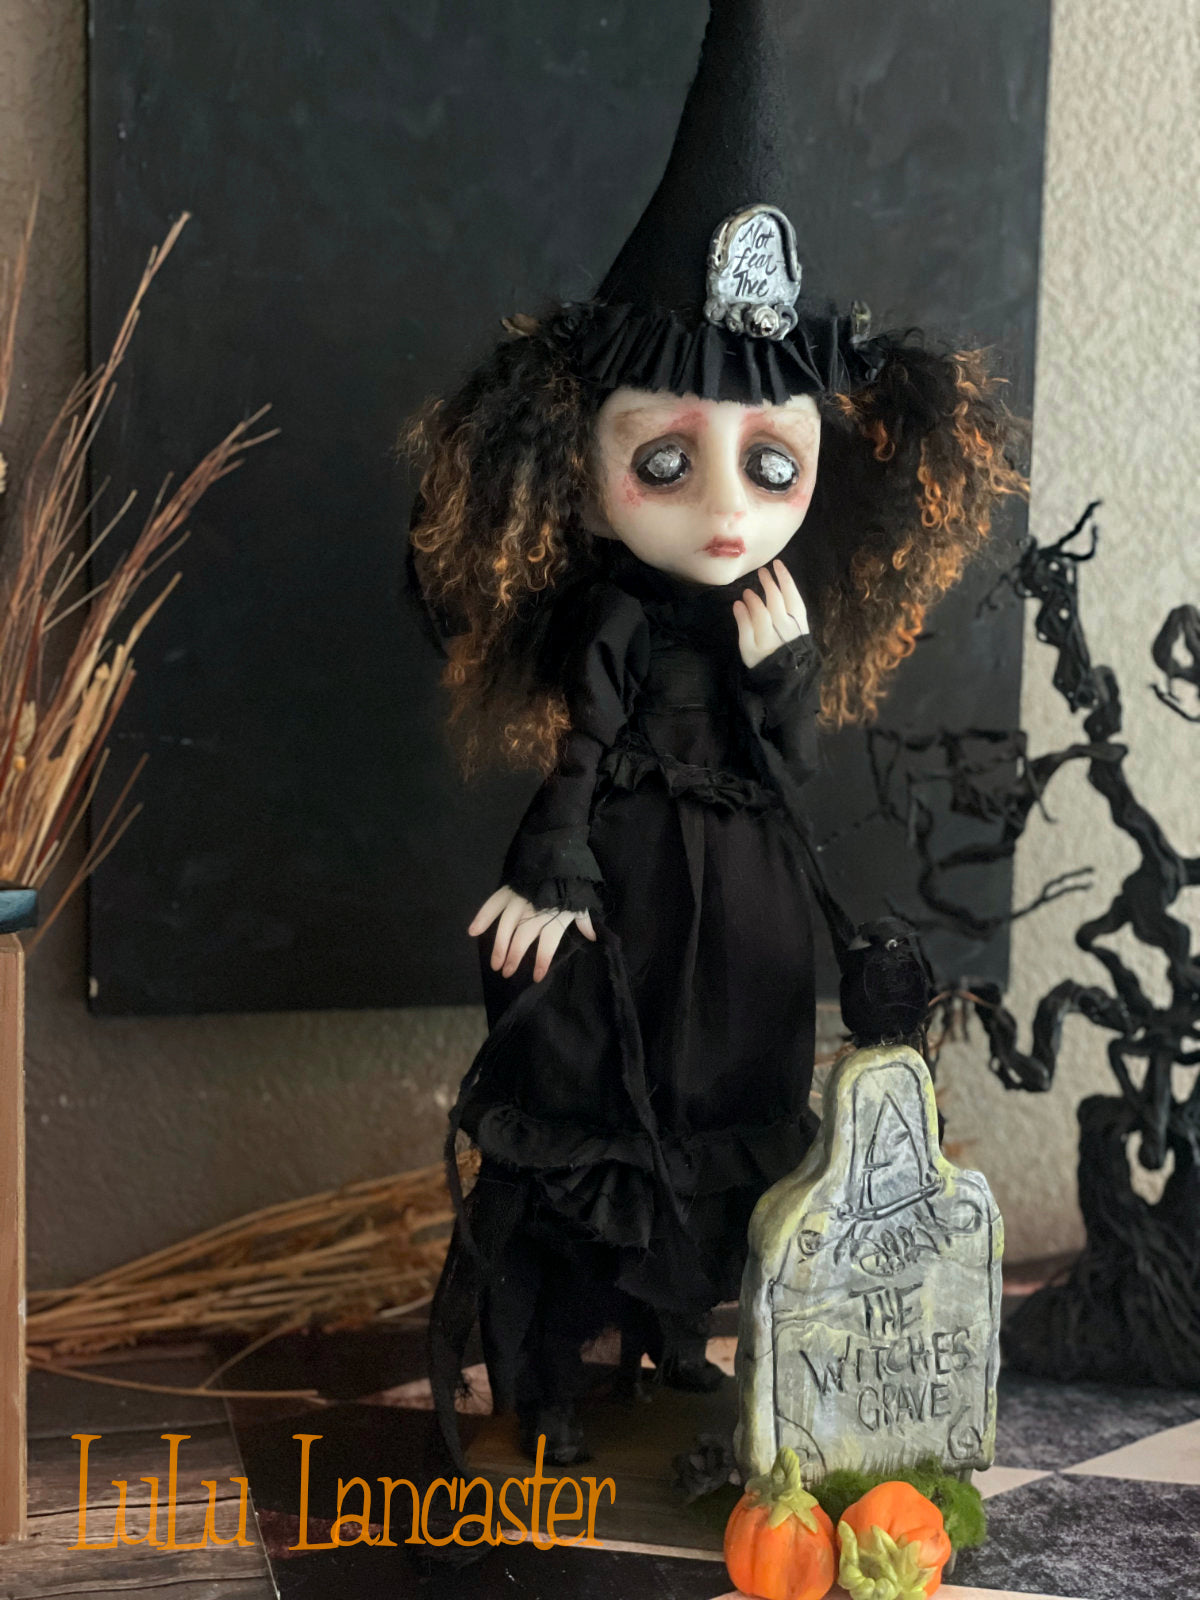 The Witches Grave Ghost Original LuLu Lancaster Halloween Art Doll